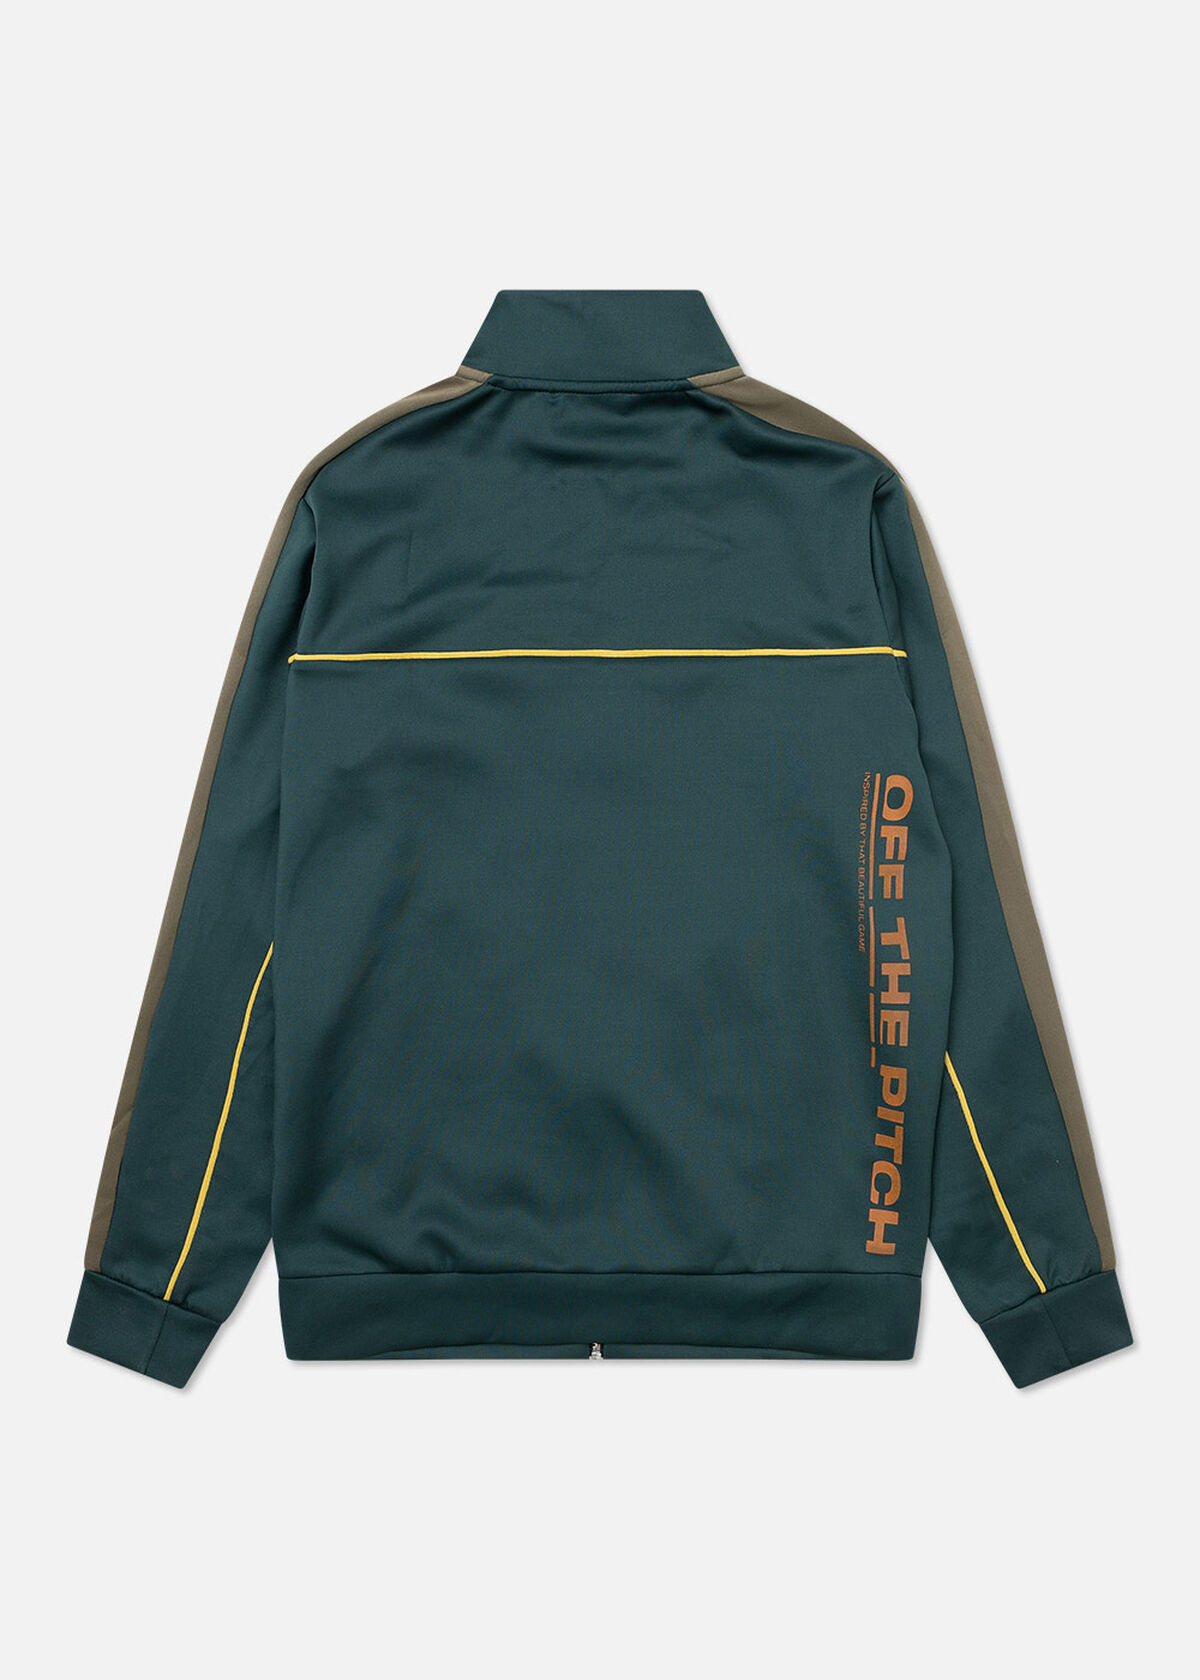 Canyon Track Suit, Dark green, hi-res